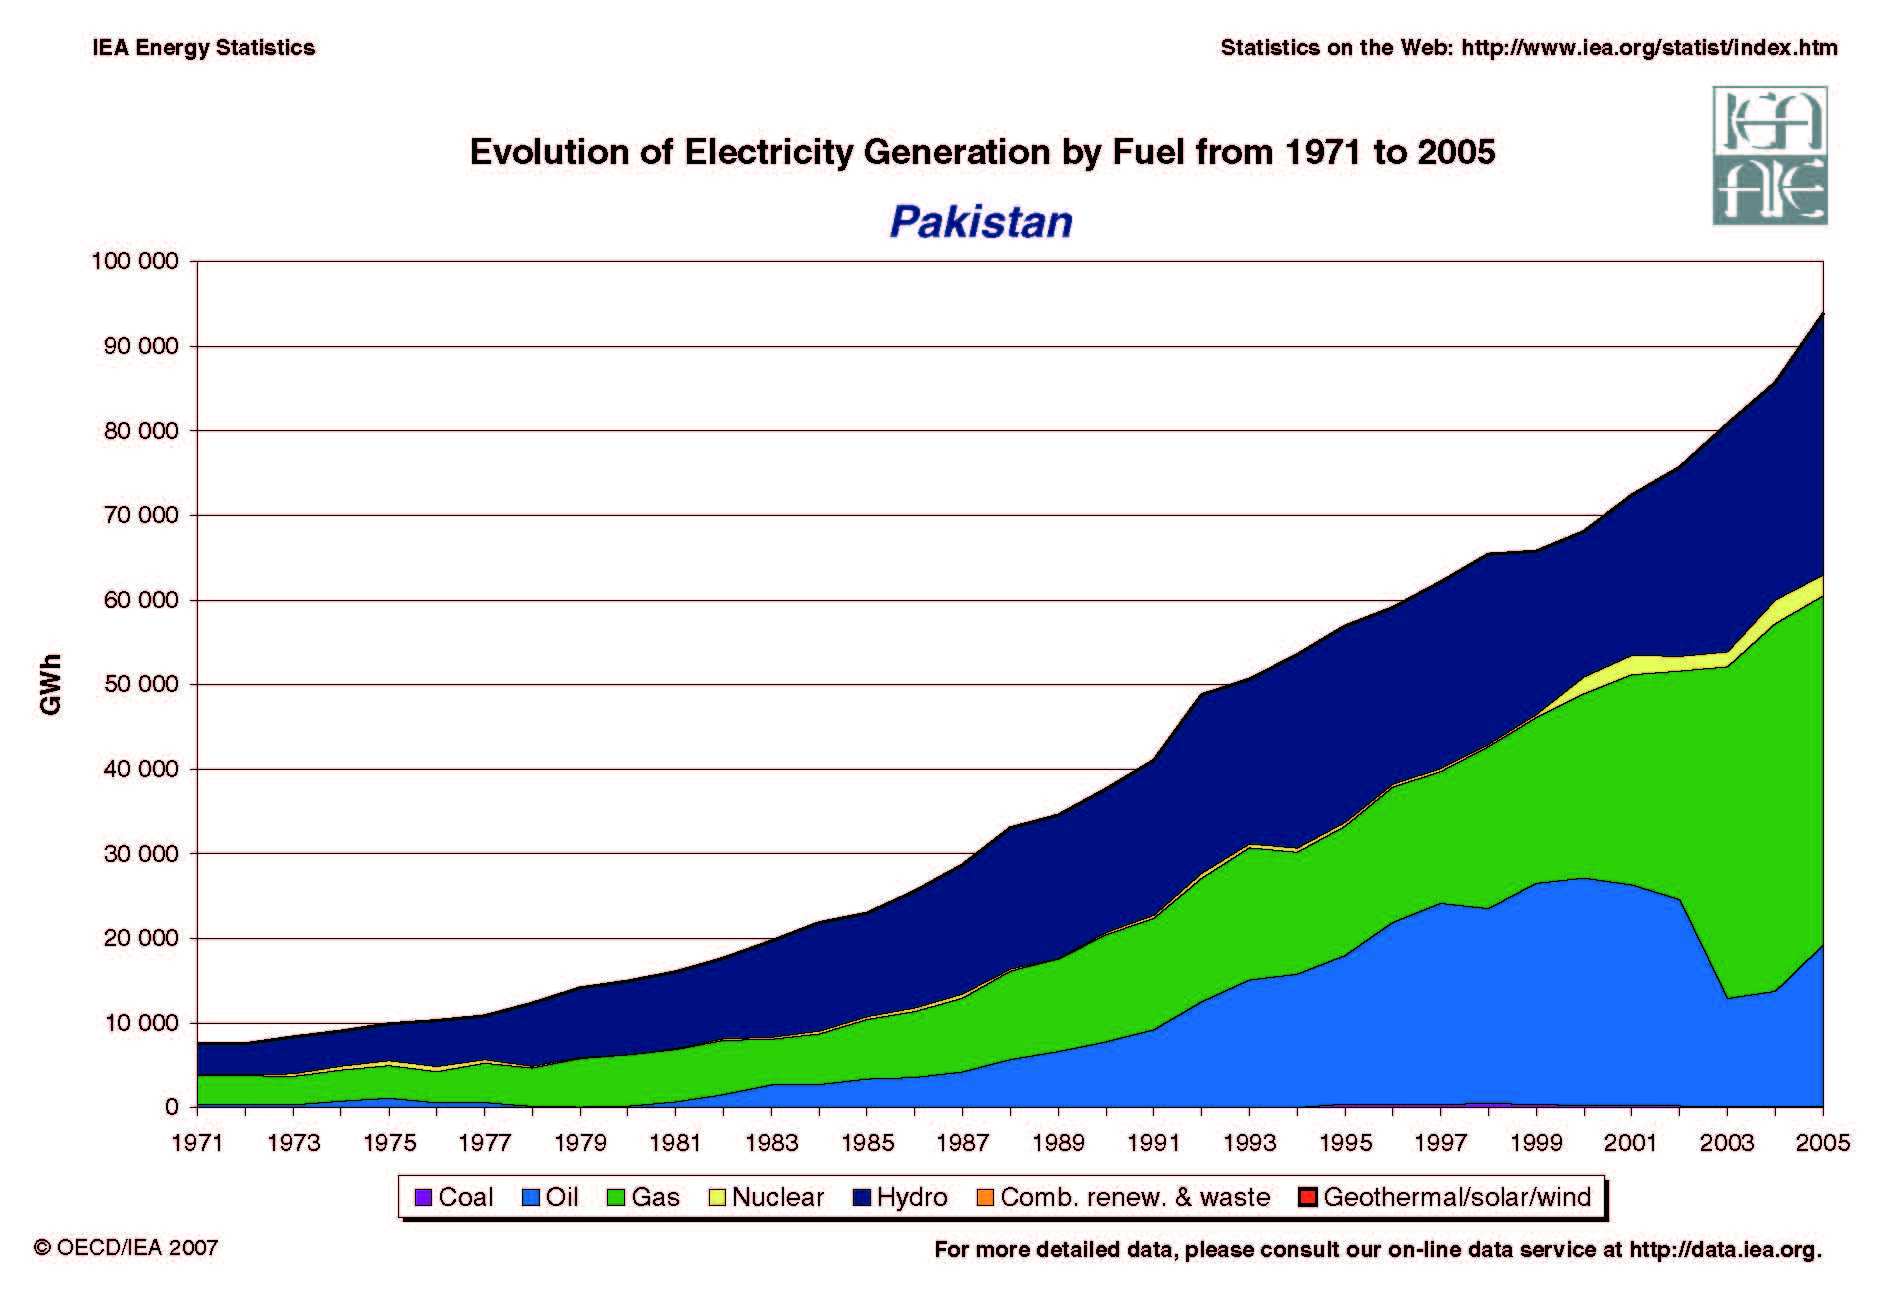 Pakistan Evolution of Electricity Generation by Fuel 1971 - 2005